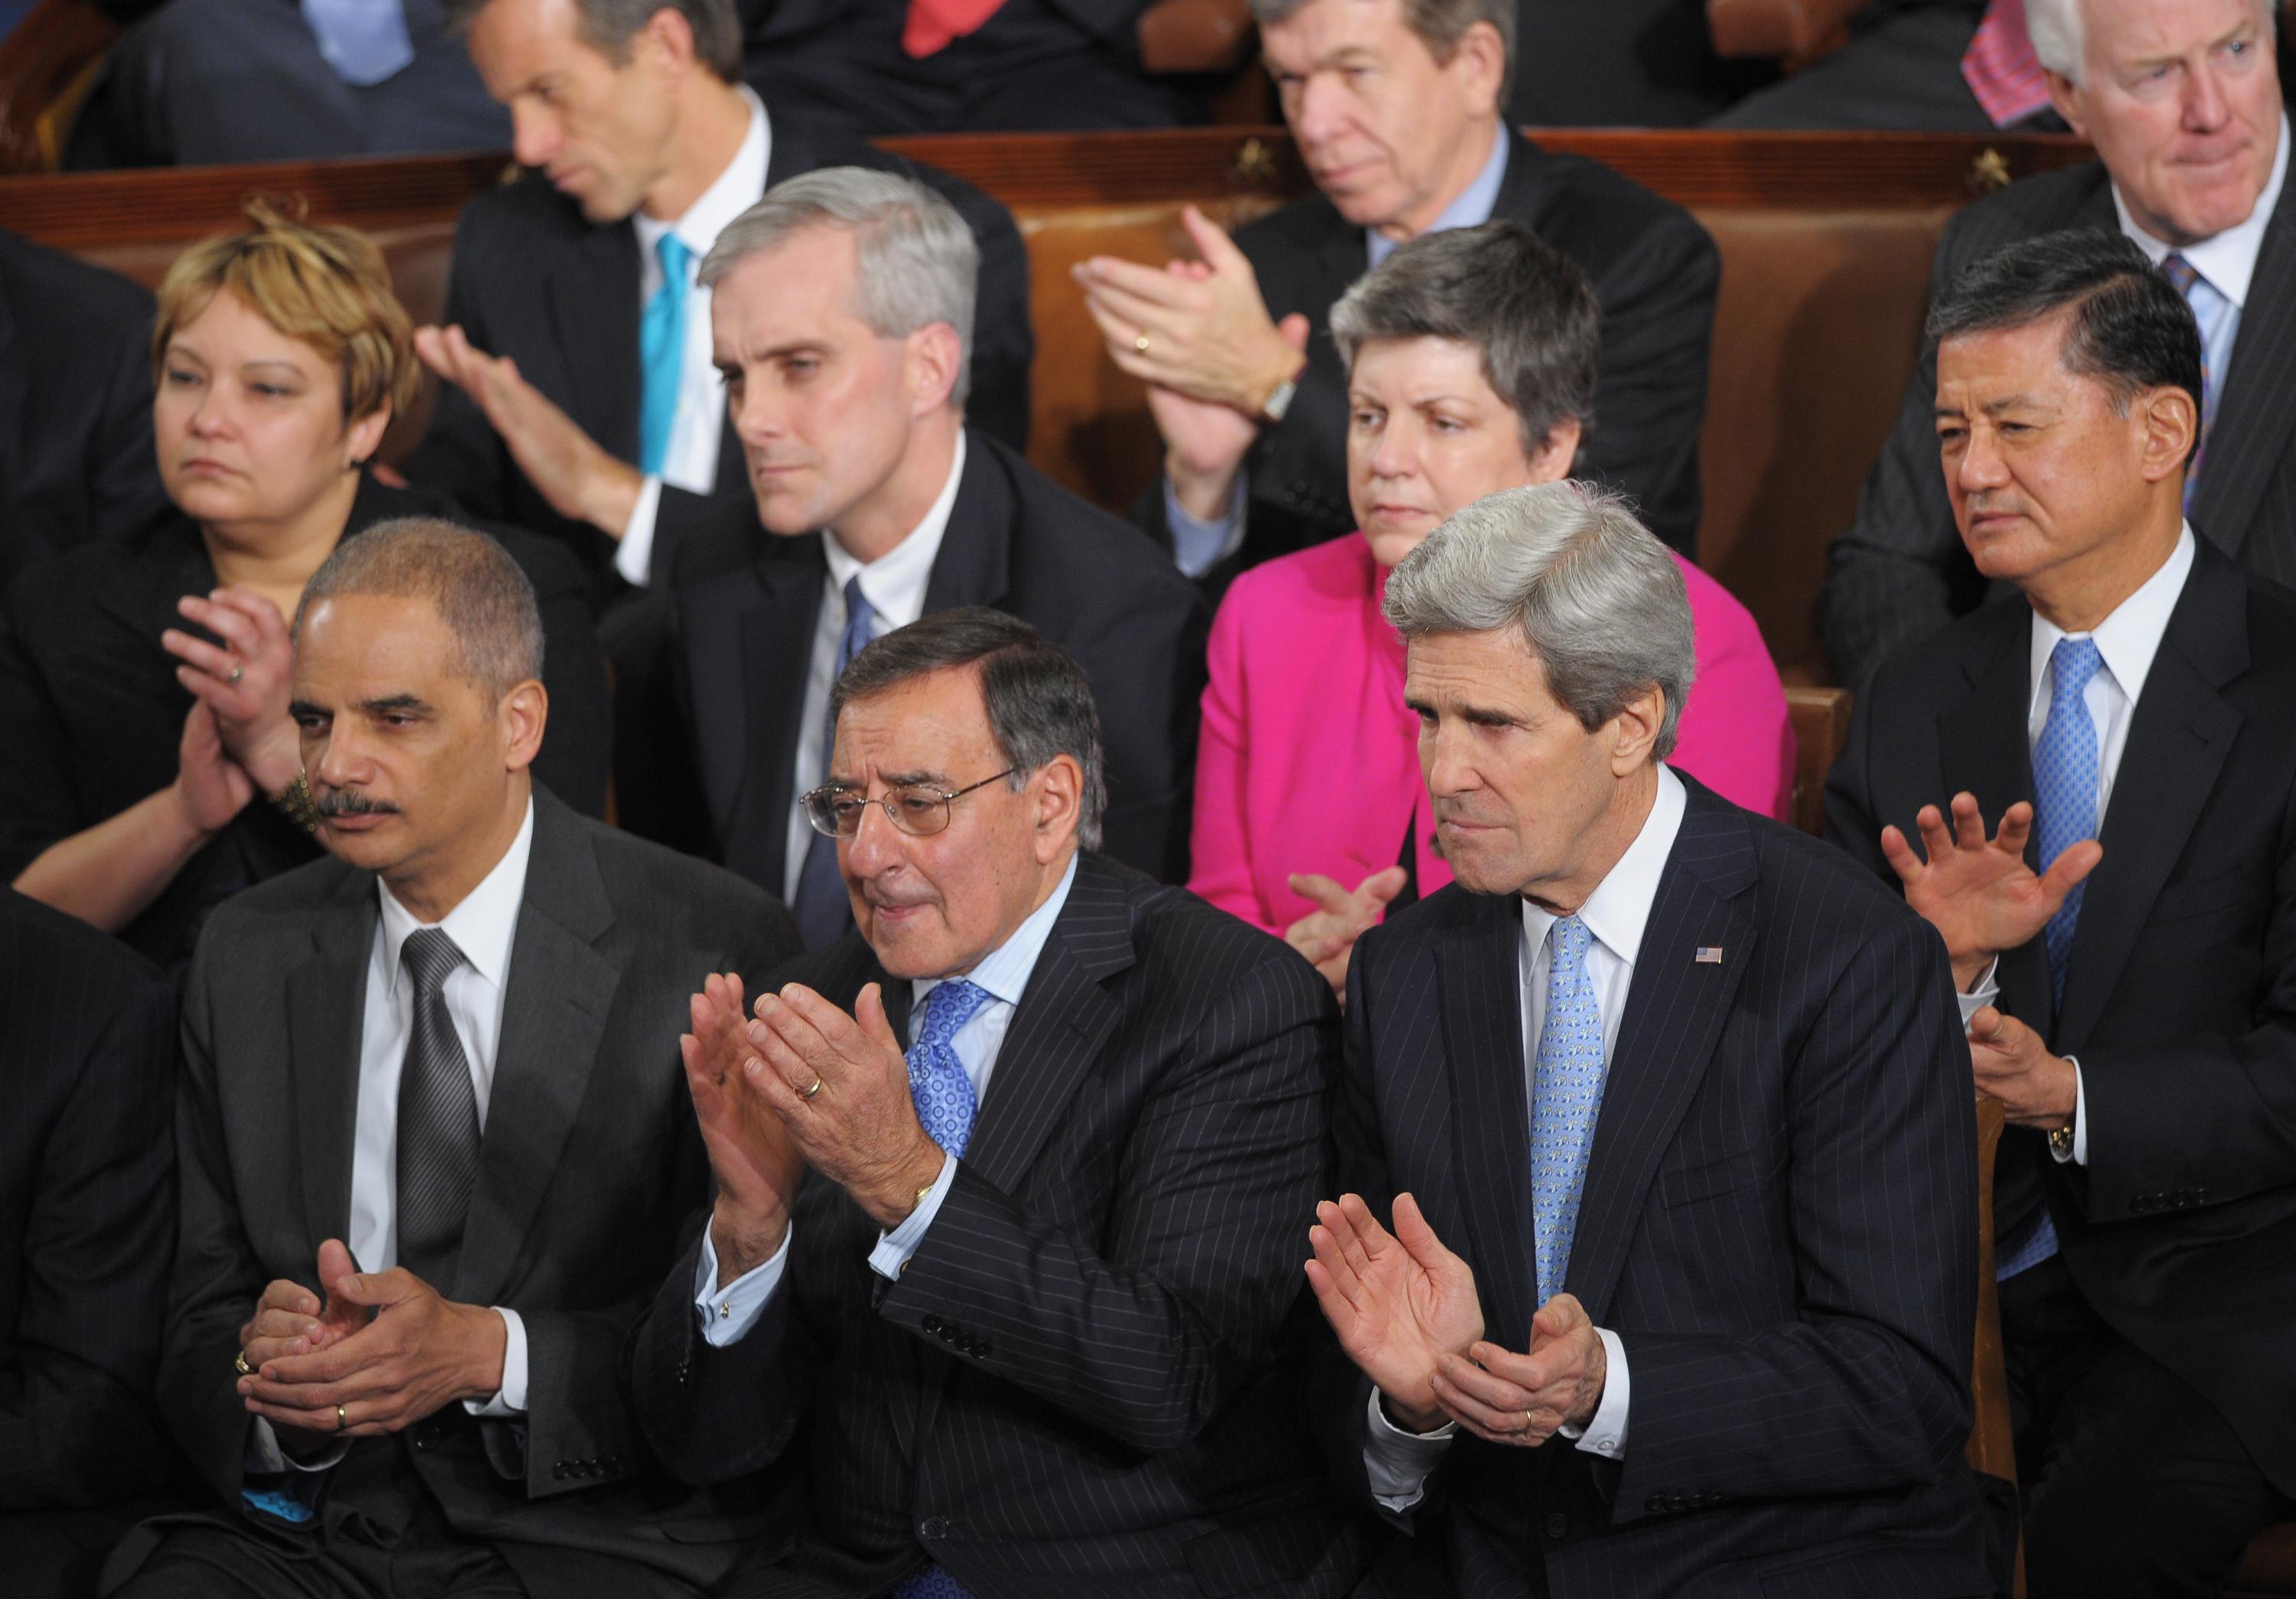 (Front row) Attorney General Eric Holder, outgoing Defense Secretary Leon Panetta, Secretary of State John Kerry, EPA Administrator Lisa Jackson, White House Chief of Staff Denis McDonough, Homeland Security Secretary Janet Napolitano and Veterans Affairs Secretary Eric Shinseki applaud as President Barack Obama delivers his State of the Union address before a joint session of Congress on February 12, 2013, at the U.S. Capitol in Washington, D.C.